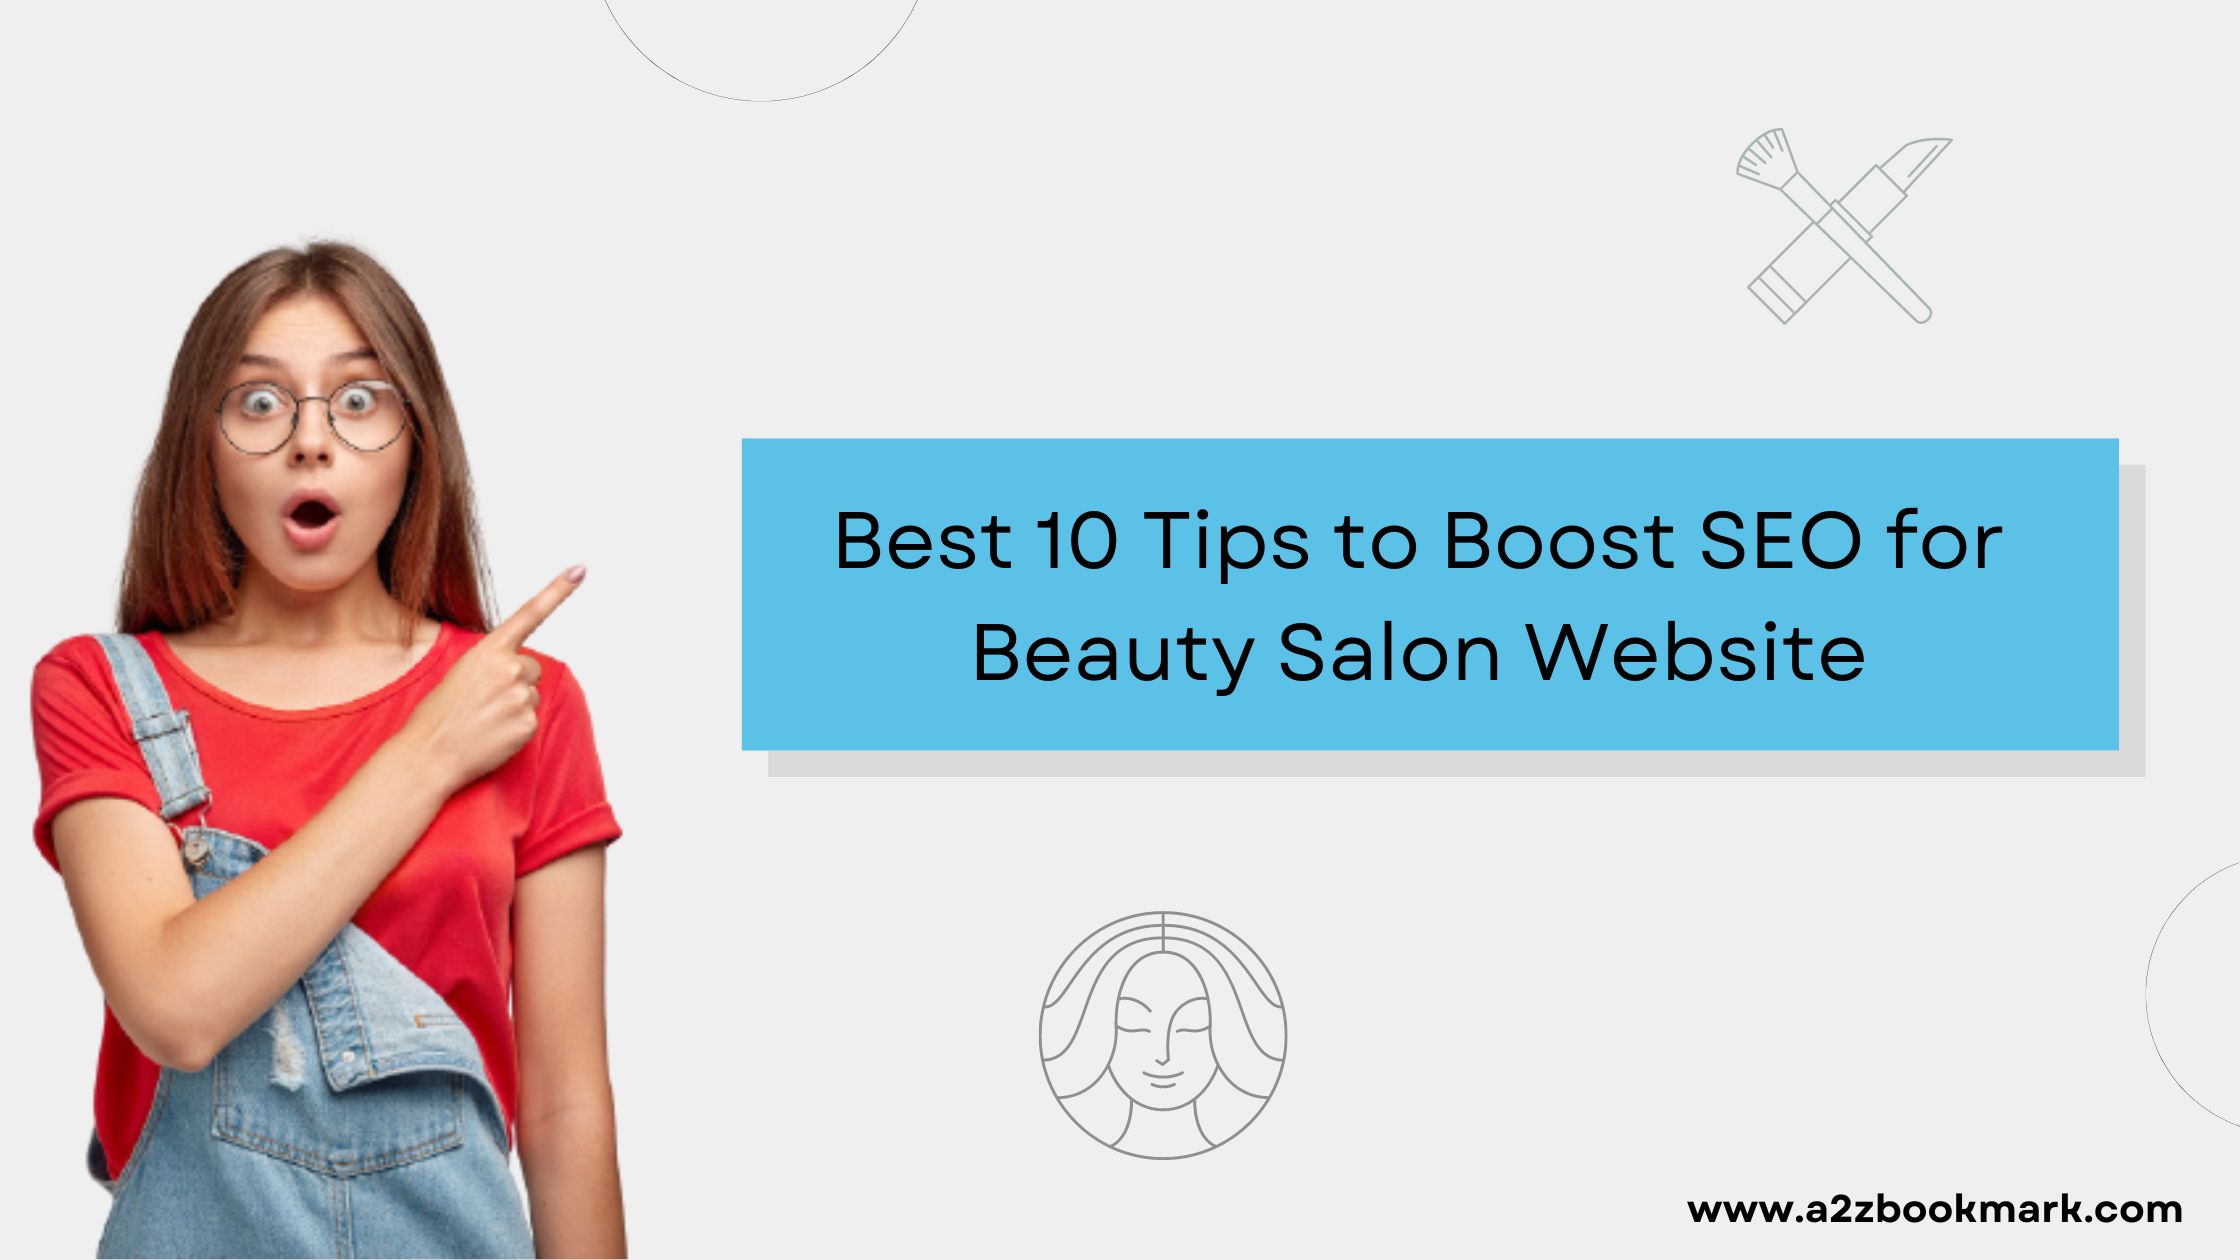 SEO for Beauty Salons: 10 Tips to Boost SEO